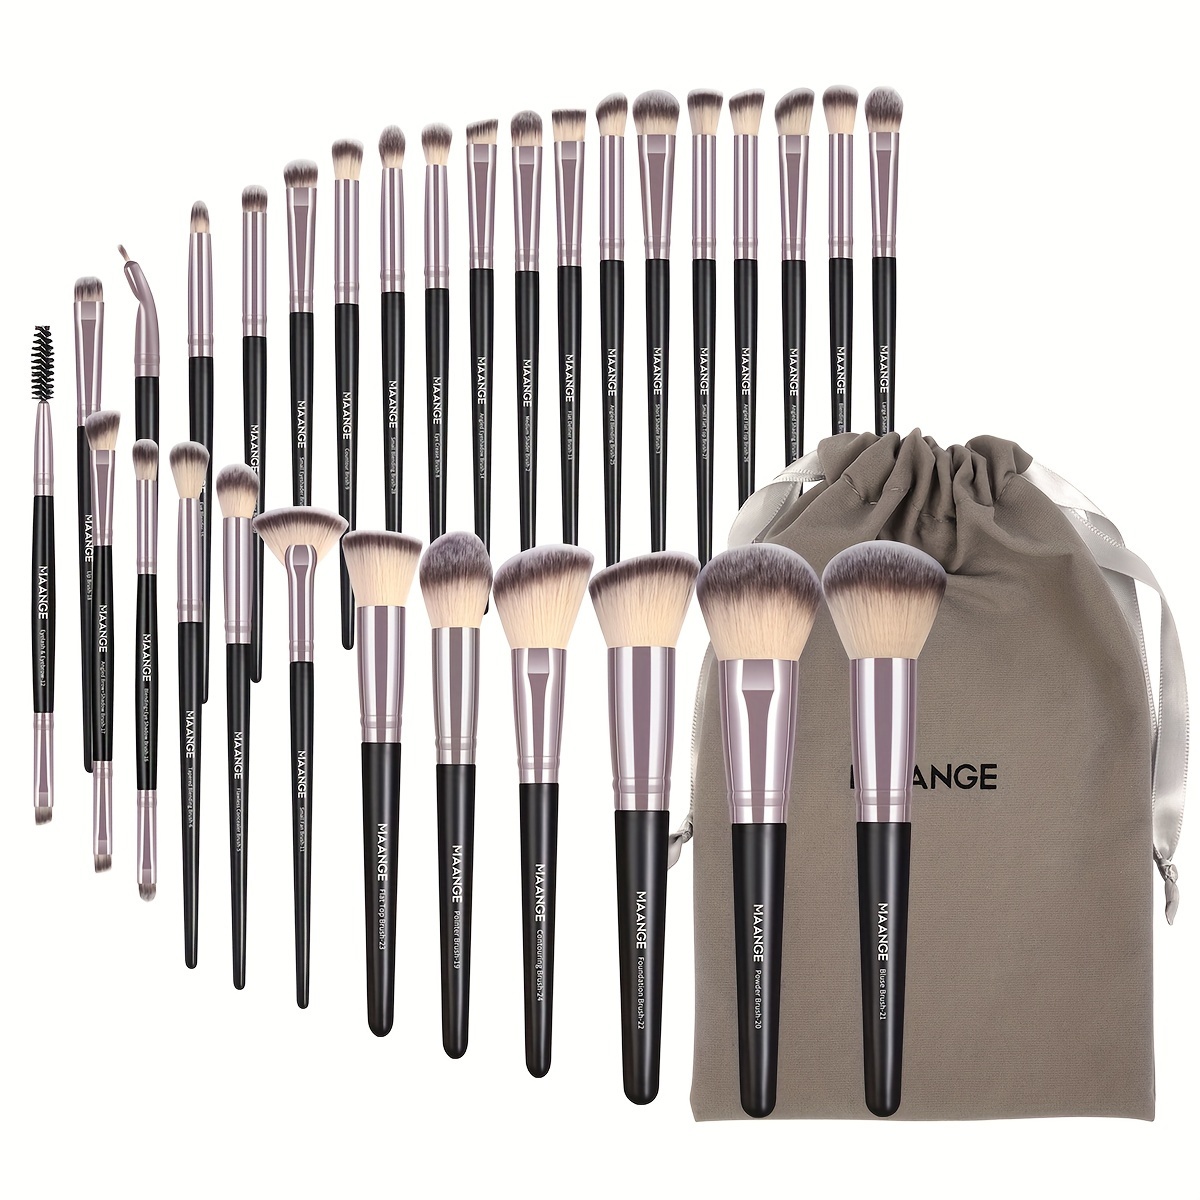 SHE HAS Makeup Brushes Set for Beginners Colorful Makeup Brush Kit Set 8Pcs  Make Up Brushes for Girls Premium Synthetic Face Powder Blush Contour  Concealer Eyeshadow Leopard Print Makeup Brushes Multi-colored